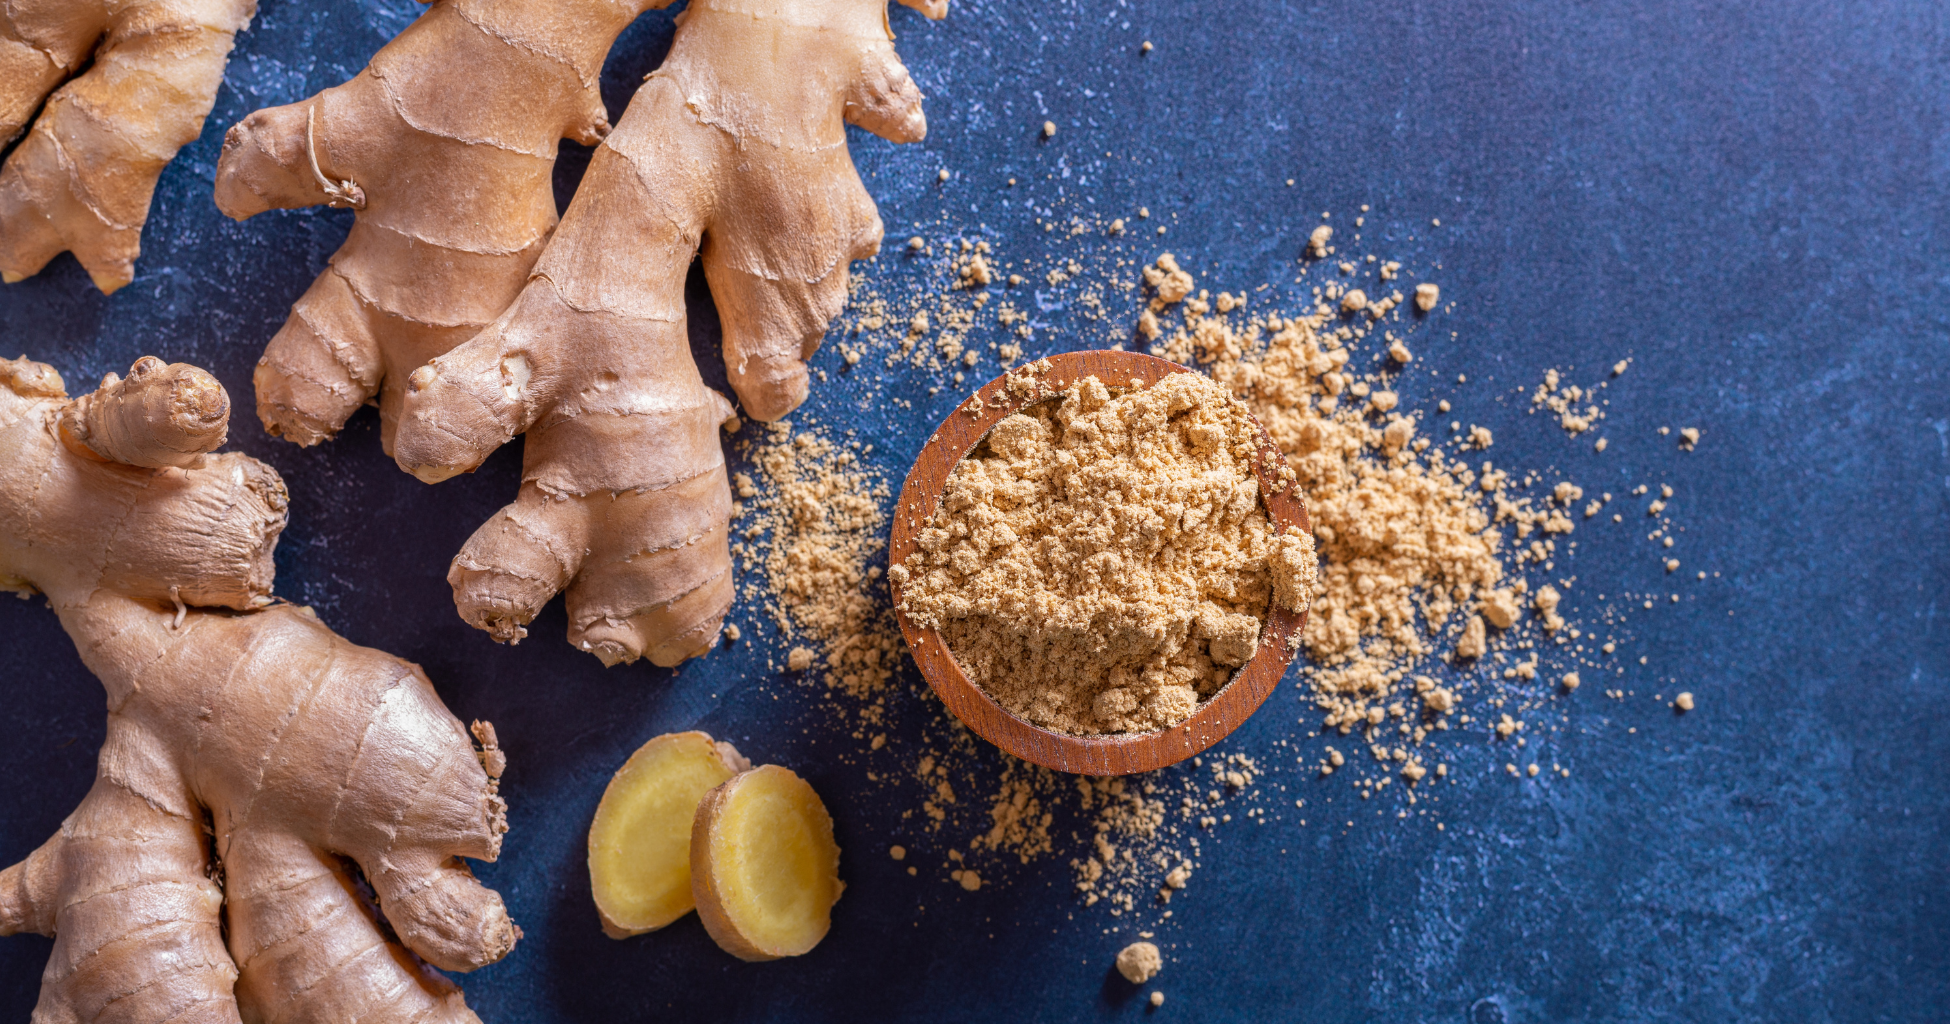 Ginger for inflammation reduction